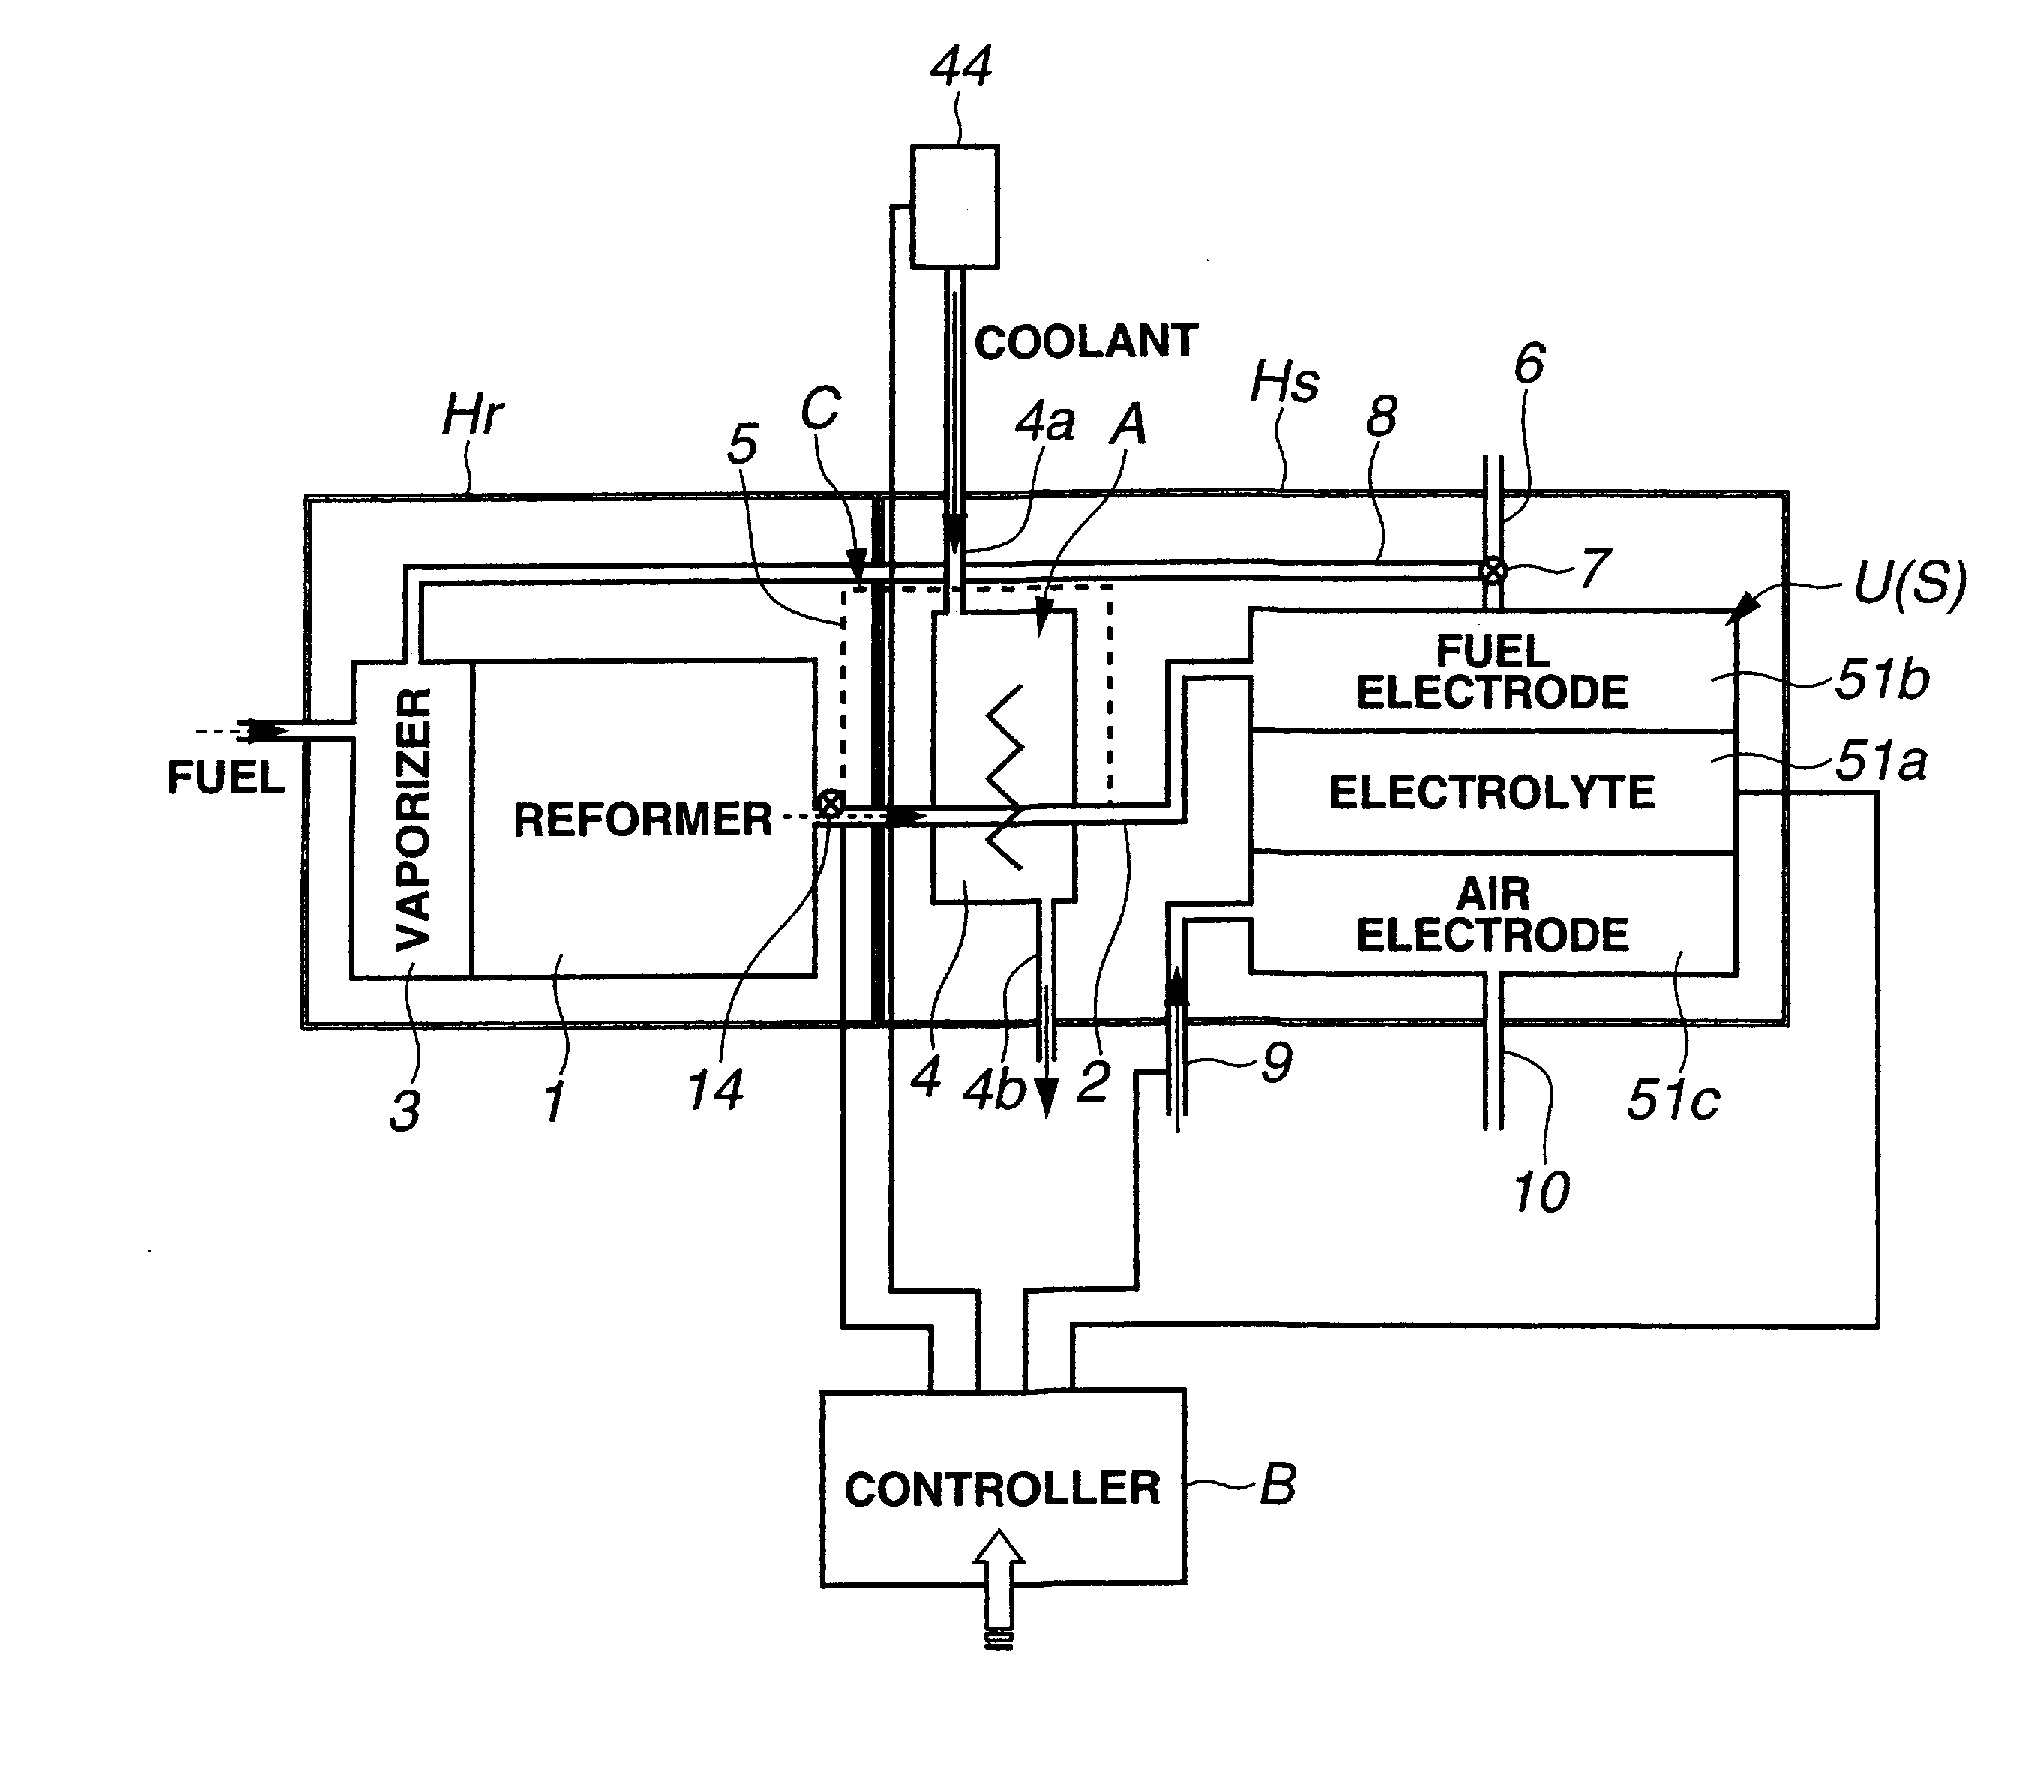 Solid electrolyte fuel cell system